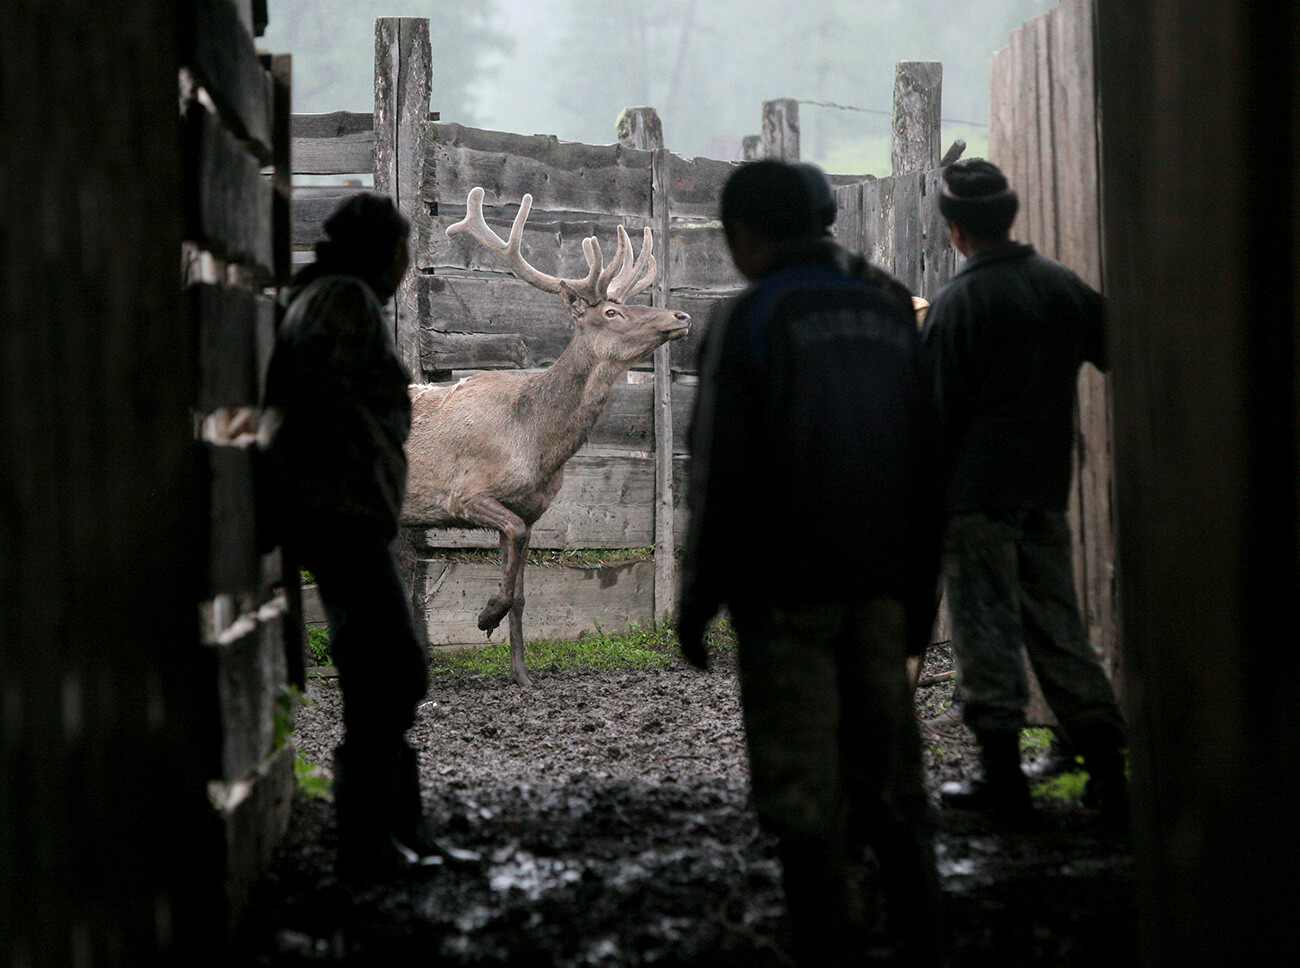 Deer breeders drive a deer into a pen for cutting antlers at the farm of the Abayskiy agricultural production company near the village of Sugash in the Ust-Koksinsky district of the Altai Republic.